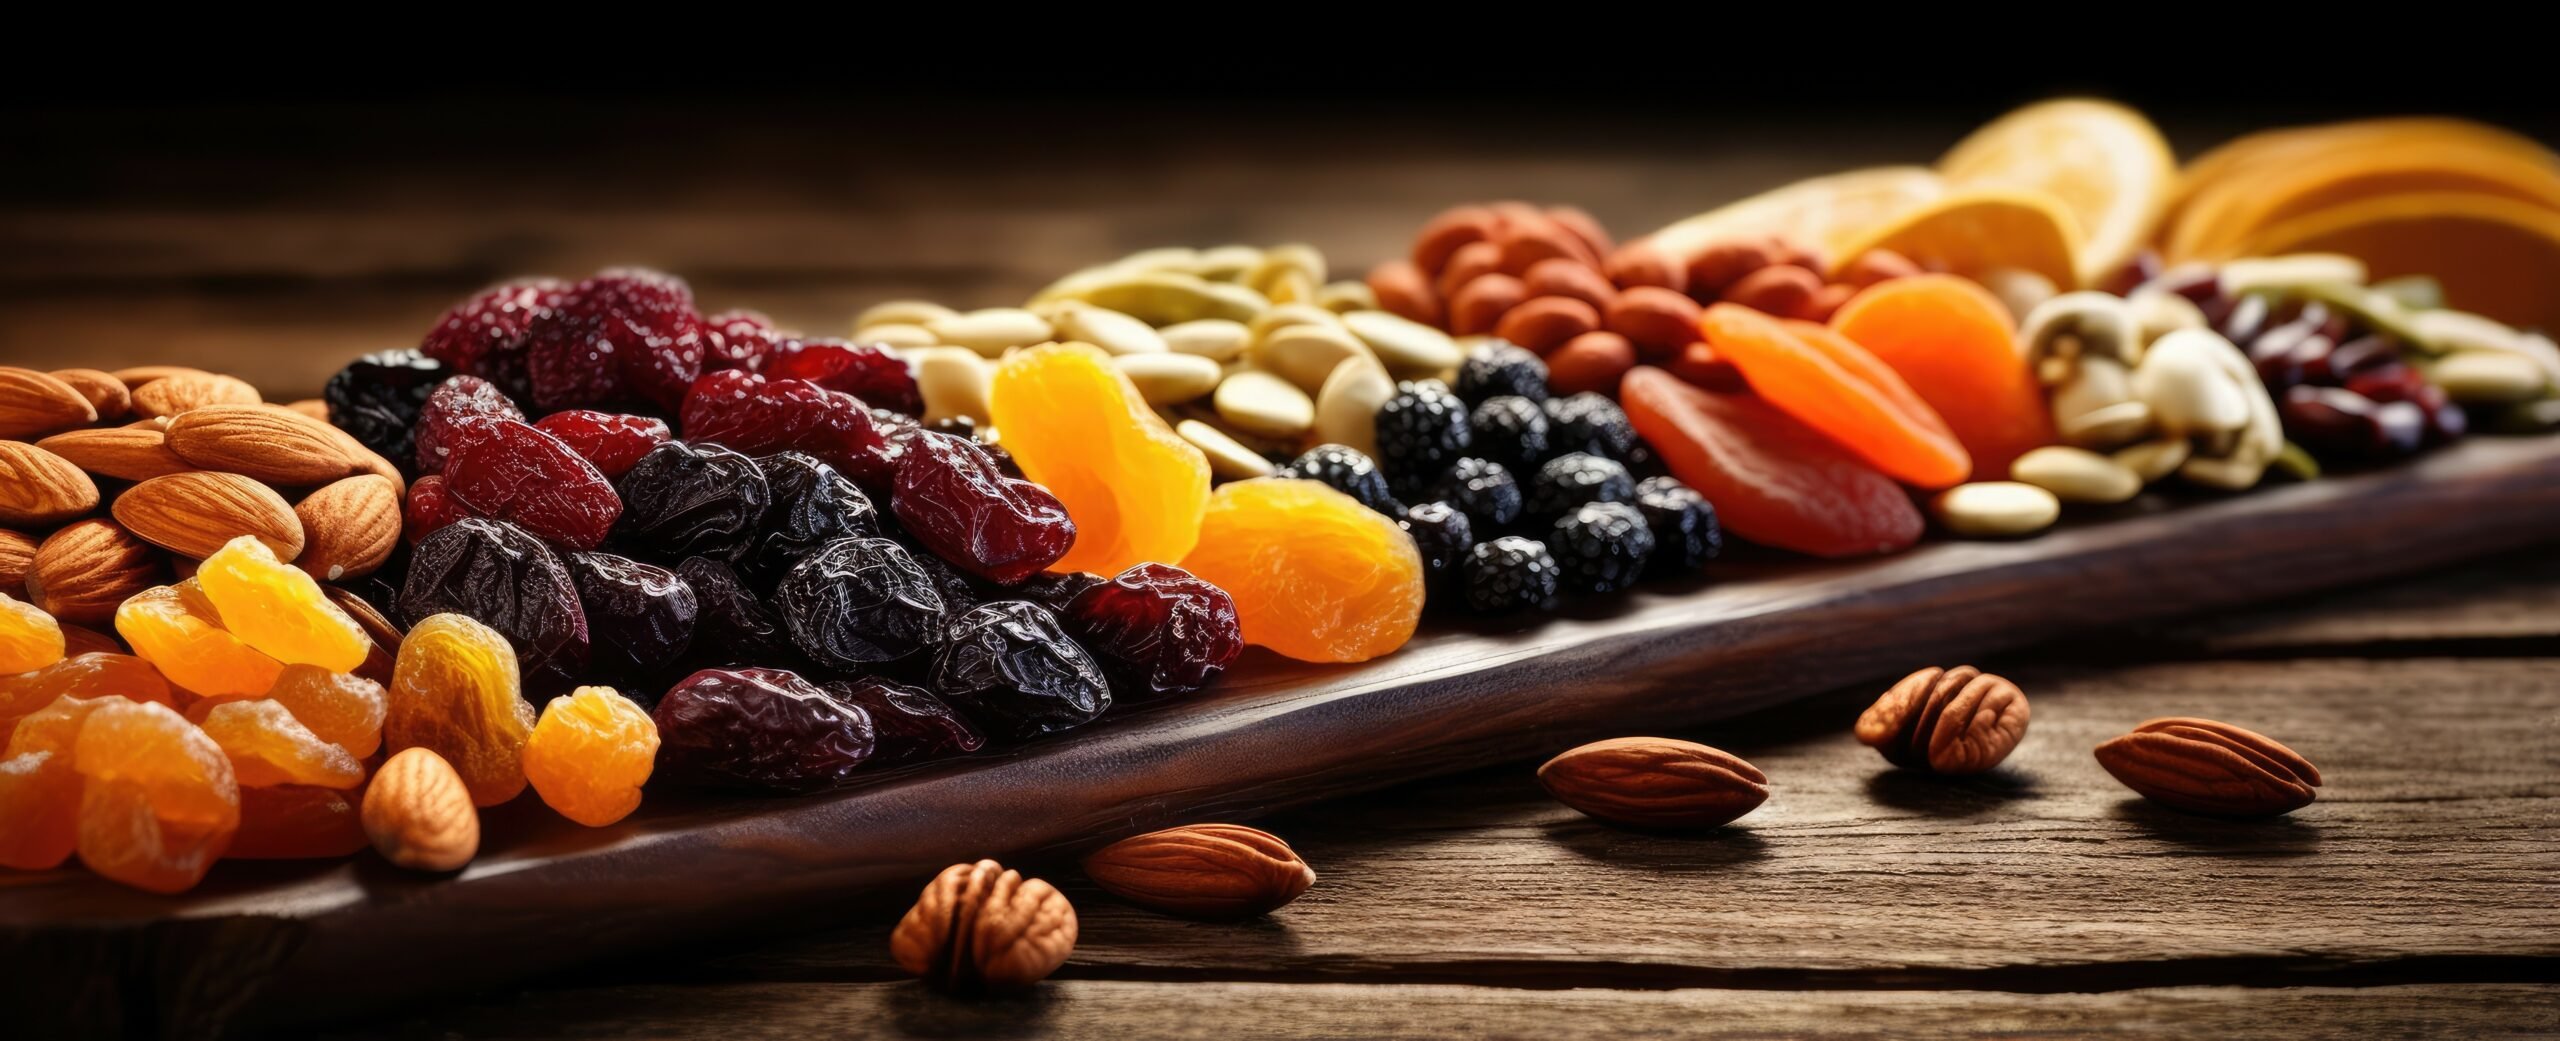 Assorted dried fruits and nuts on a dark wood backdrop with focused contrast